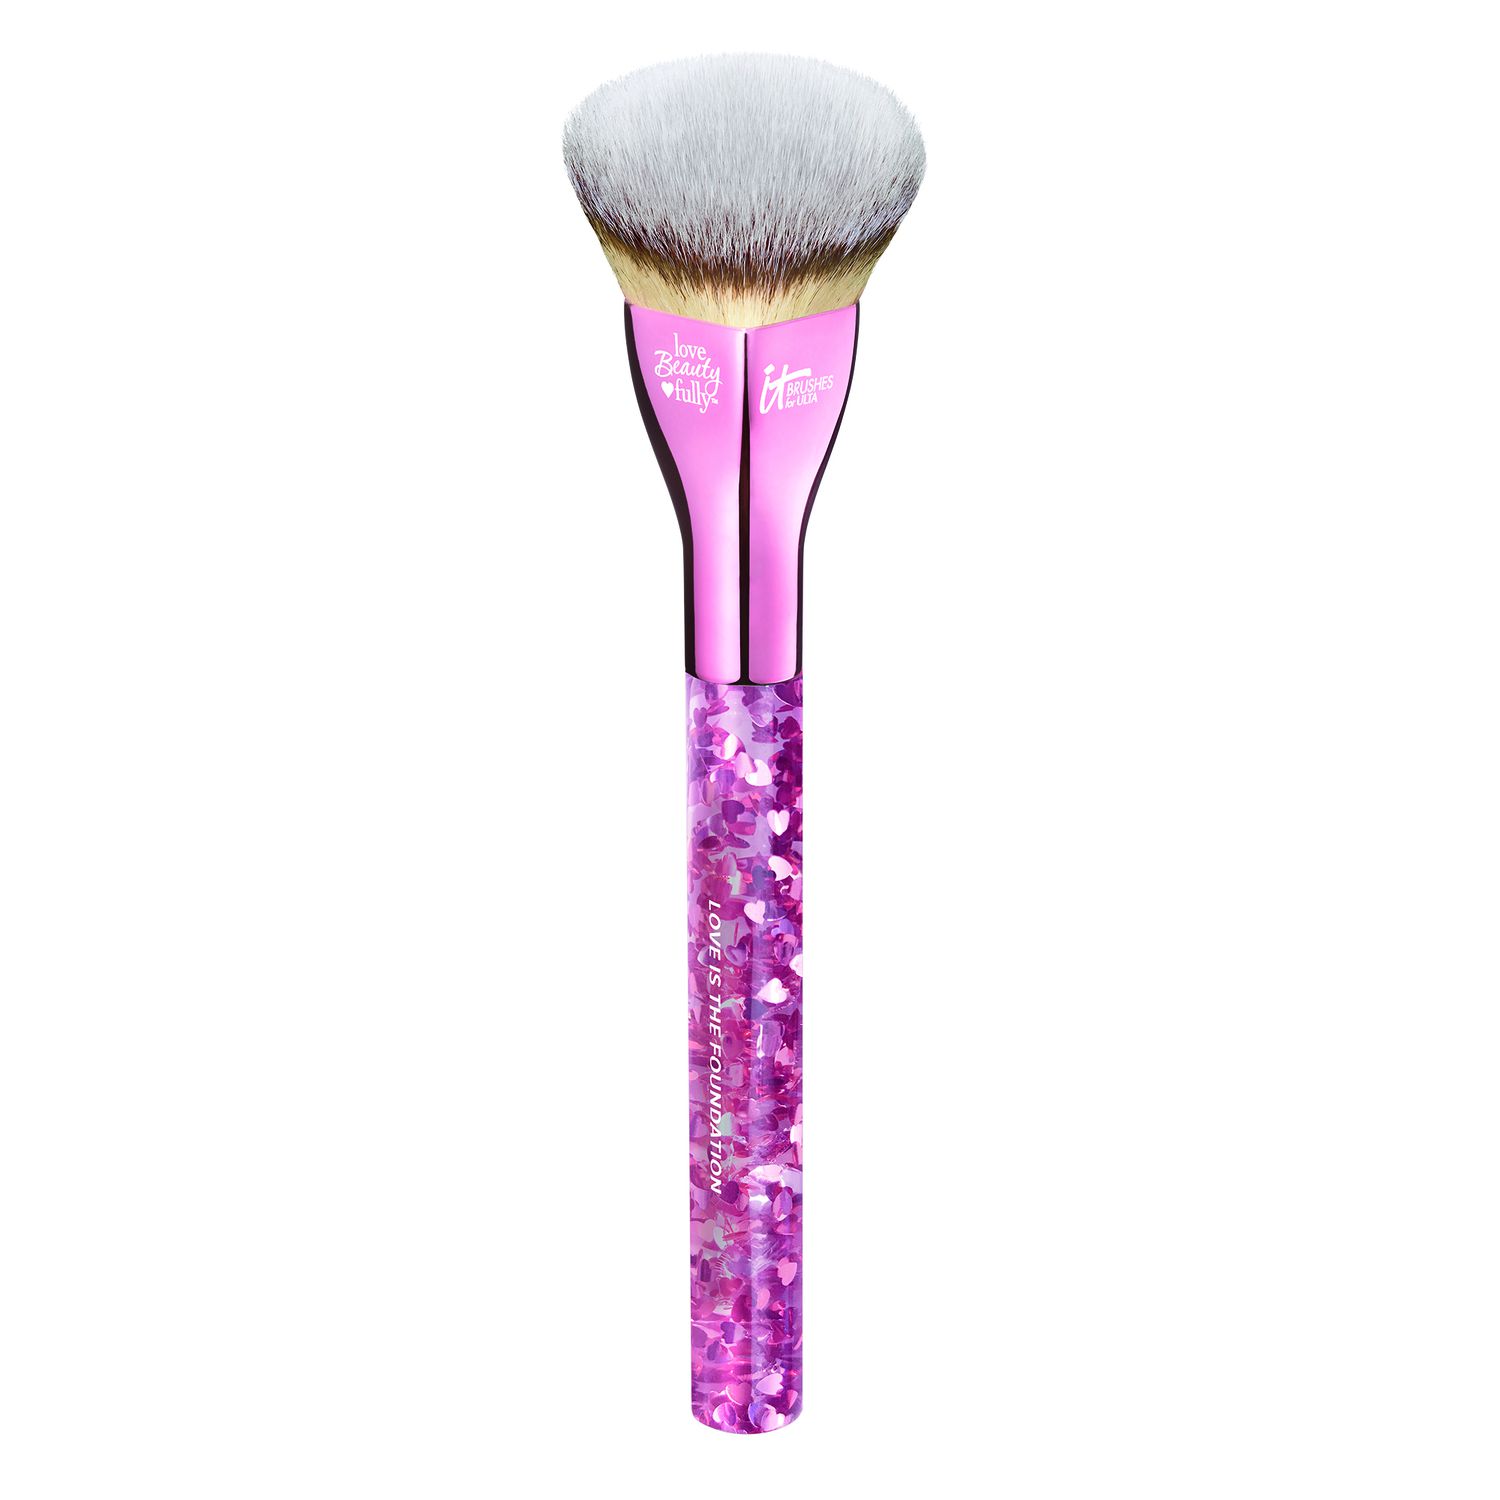 IT Cosmetics Love Beauty Fully Love is the Foundation Brush